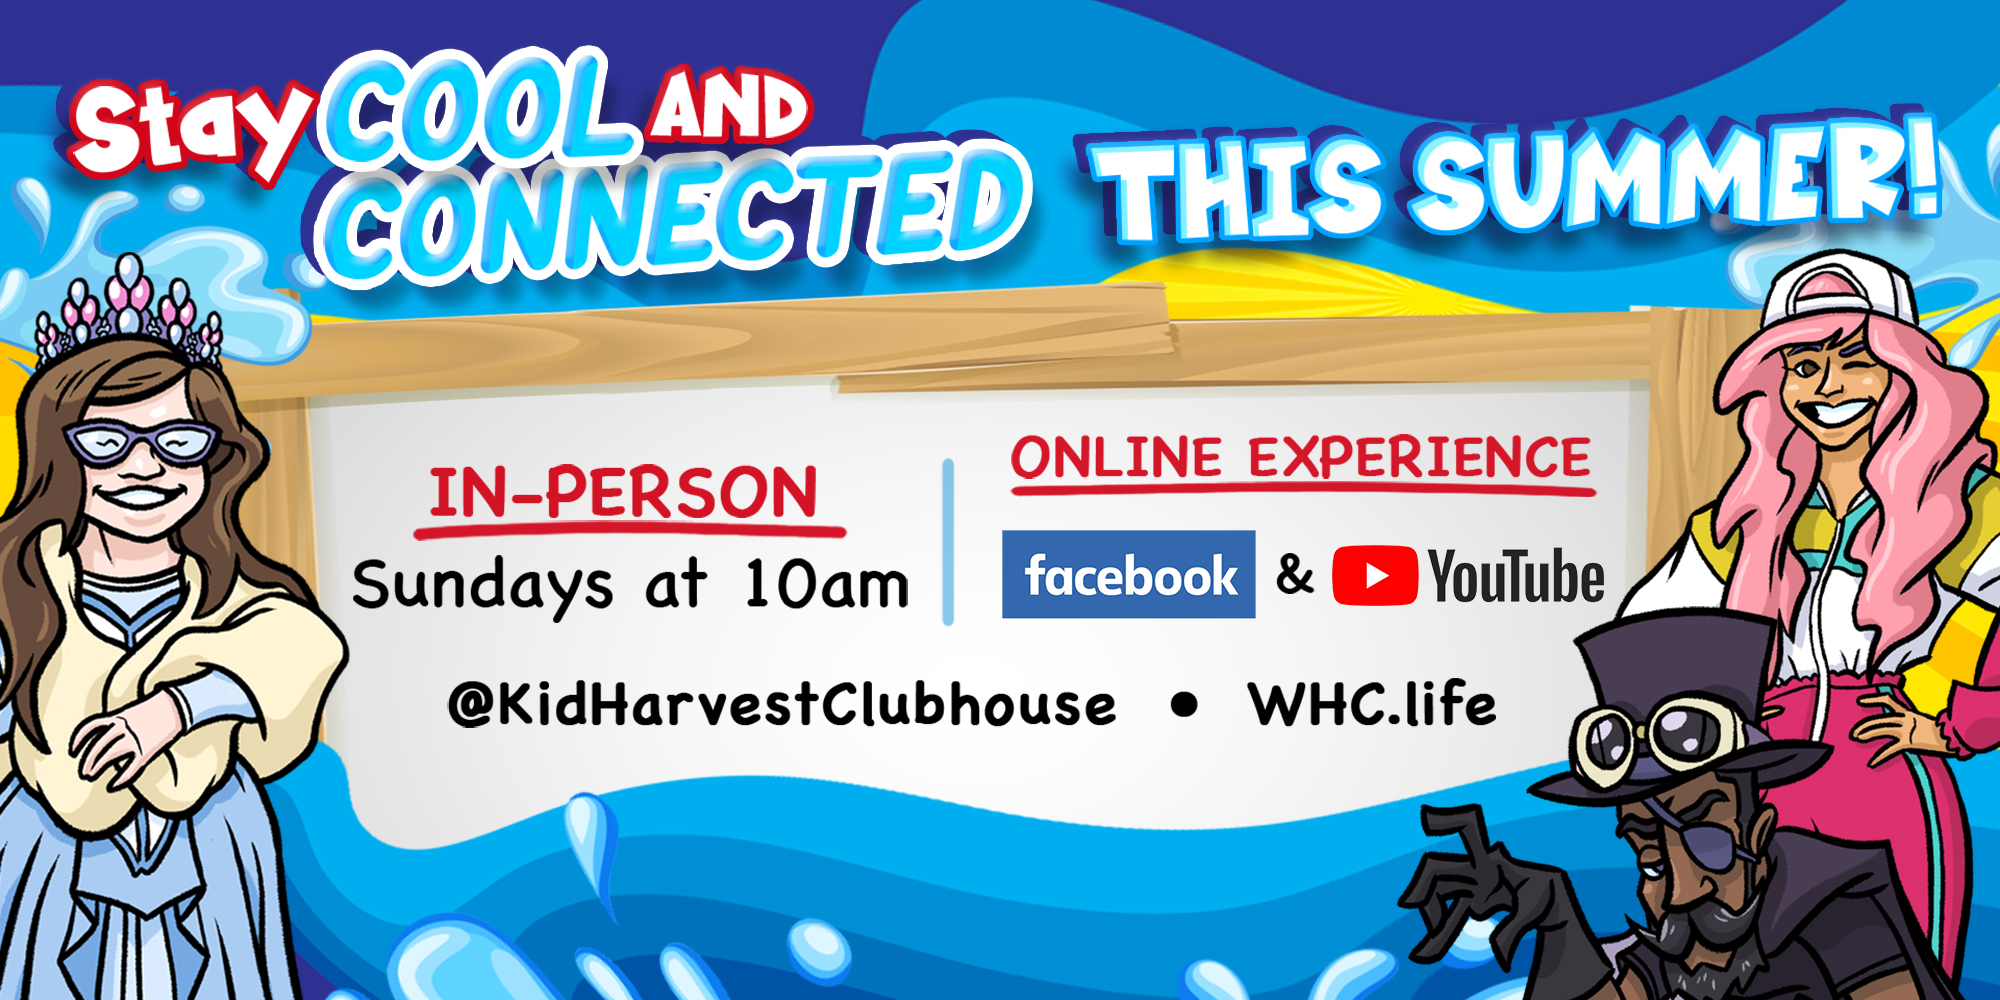 Stay Cool and Connected This Summer! In-person Sundays at 10am Online Experience Facebook and Youtube @kidharvestclubhouse Whc.Life